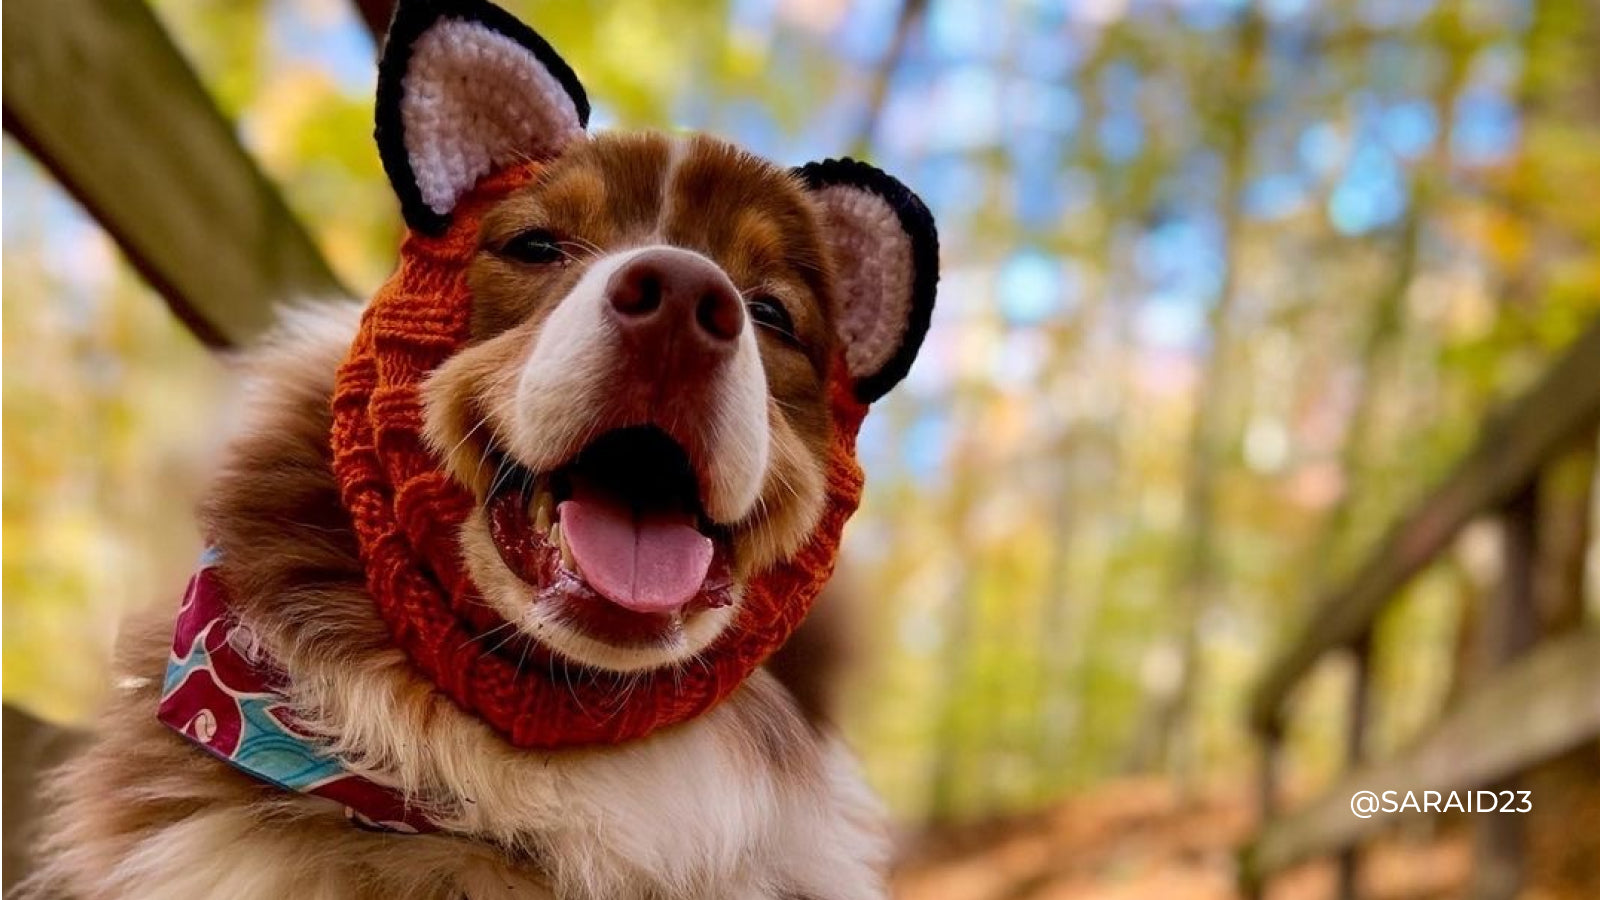 A brown and white dog wears a hand knitted bear costumer